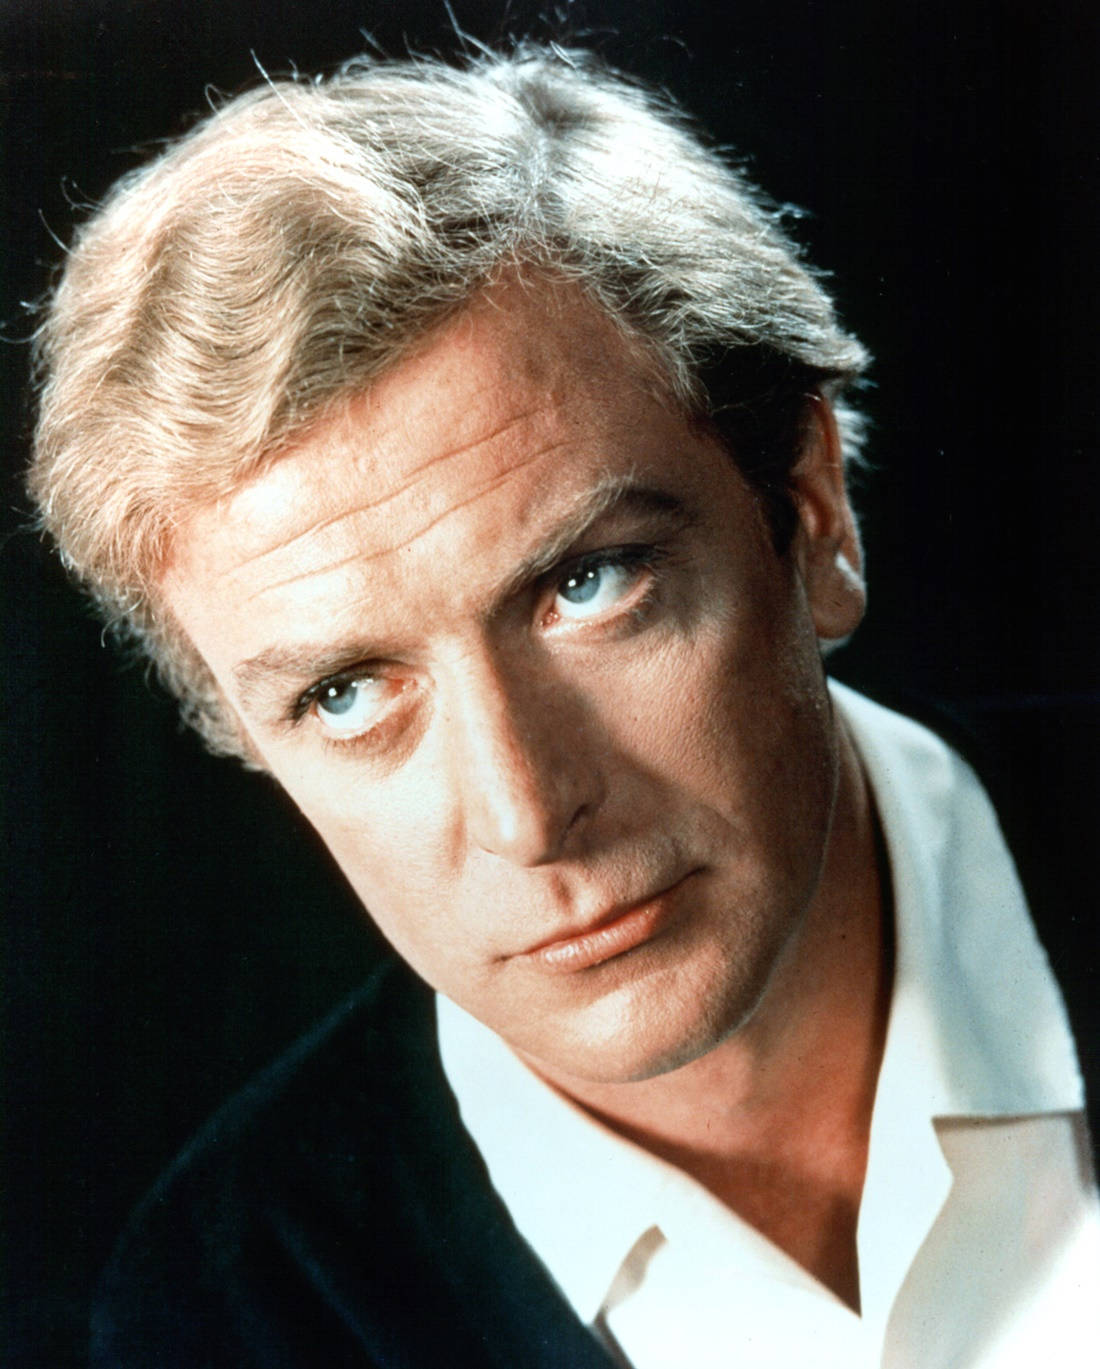 Acclaimed English Actor Michael Caine in Portrait Photography Wallpaper